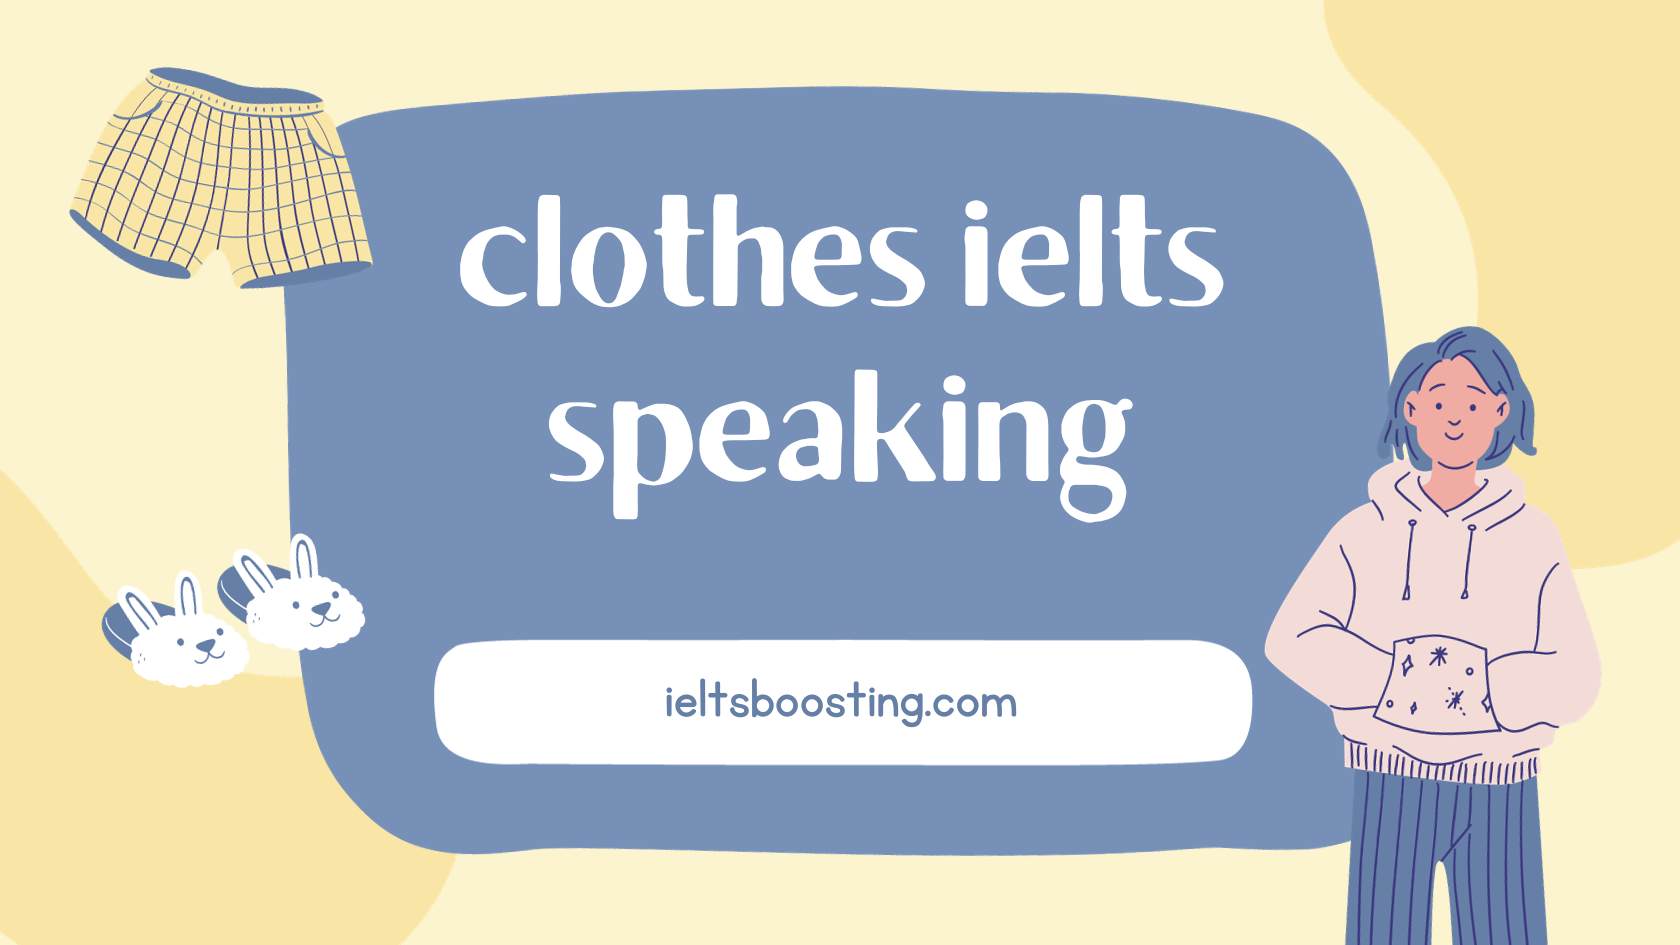 Clothes ielts speaking - boost your ielts speaking part 1